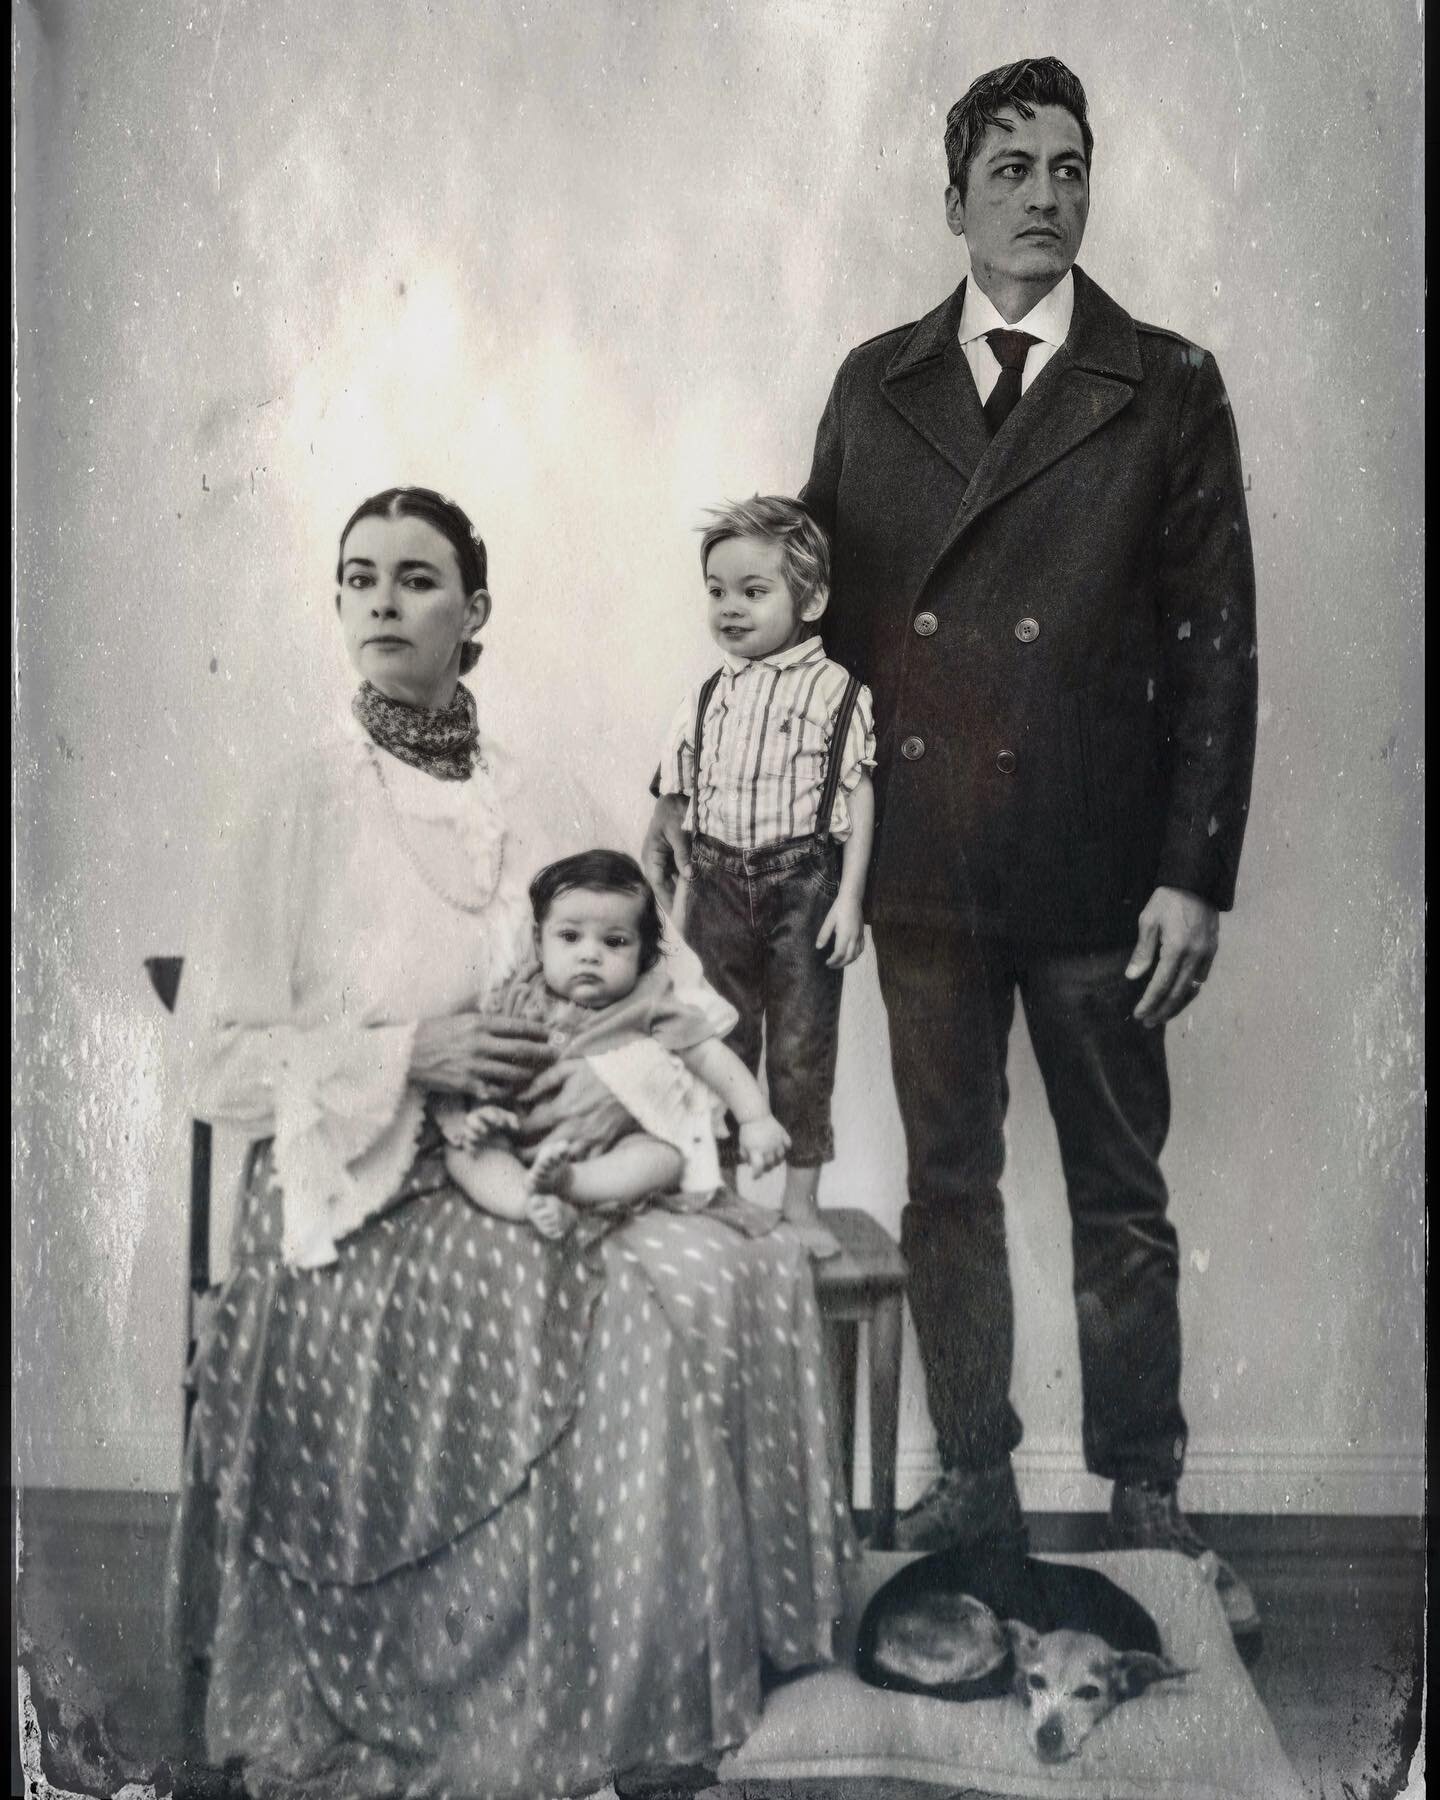 Hi from The Paul Family circa 1893. 
💀 🎃 👻 🕷️ 🕯️ 👁️🔮⚰️
We love everything vintage, period piece novels, black and white films, mid century furniture, I can stare at family photos all day, we use Tin Type for major periods in our lives. We love